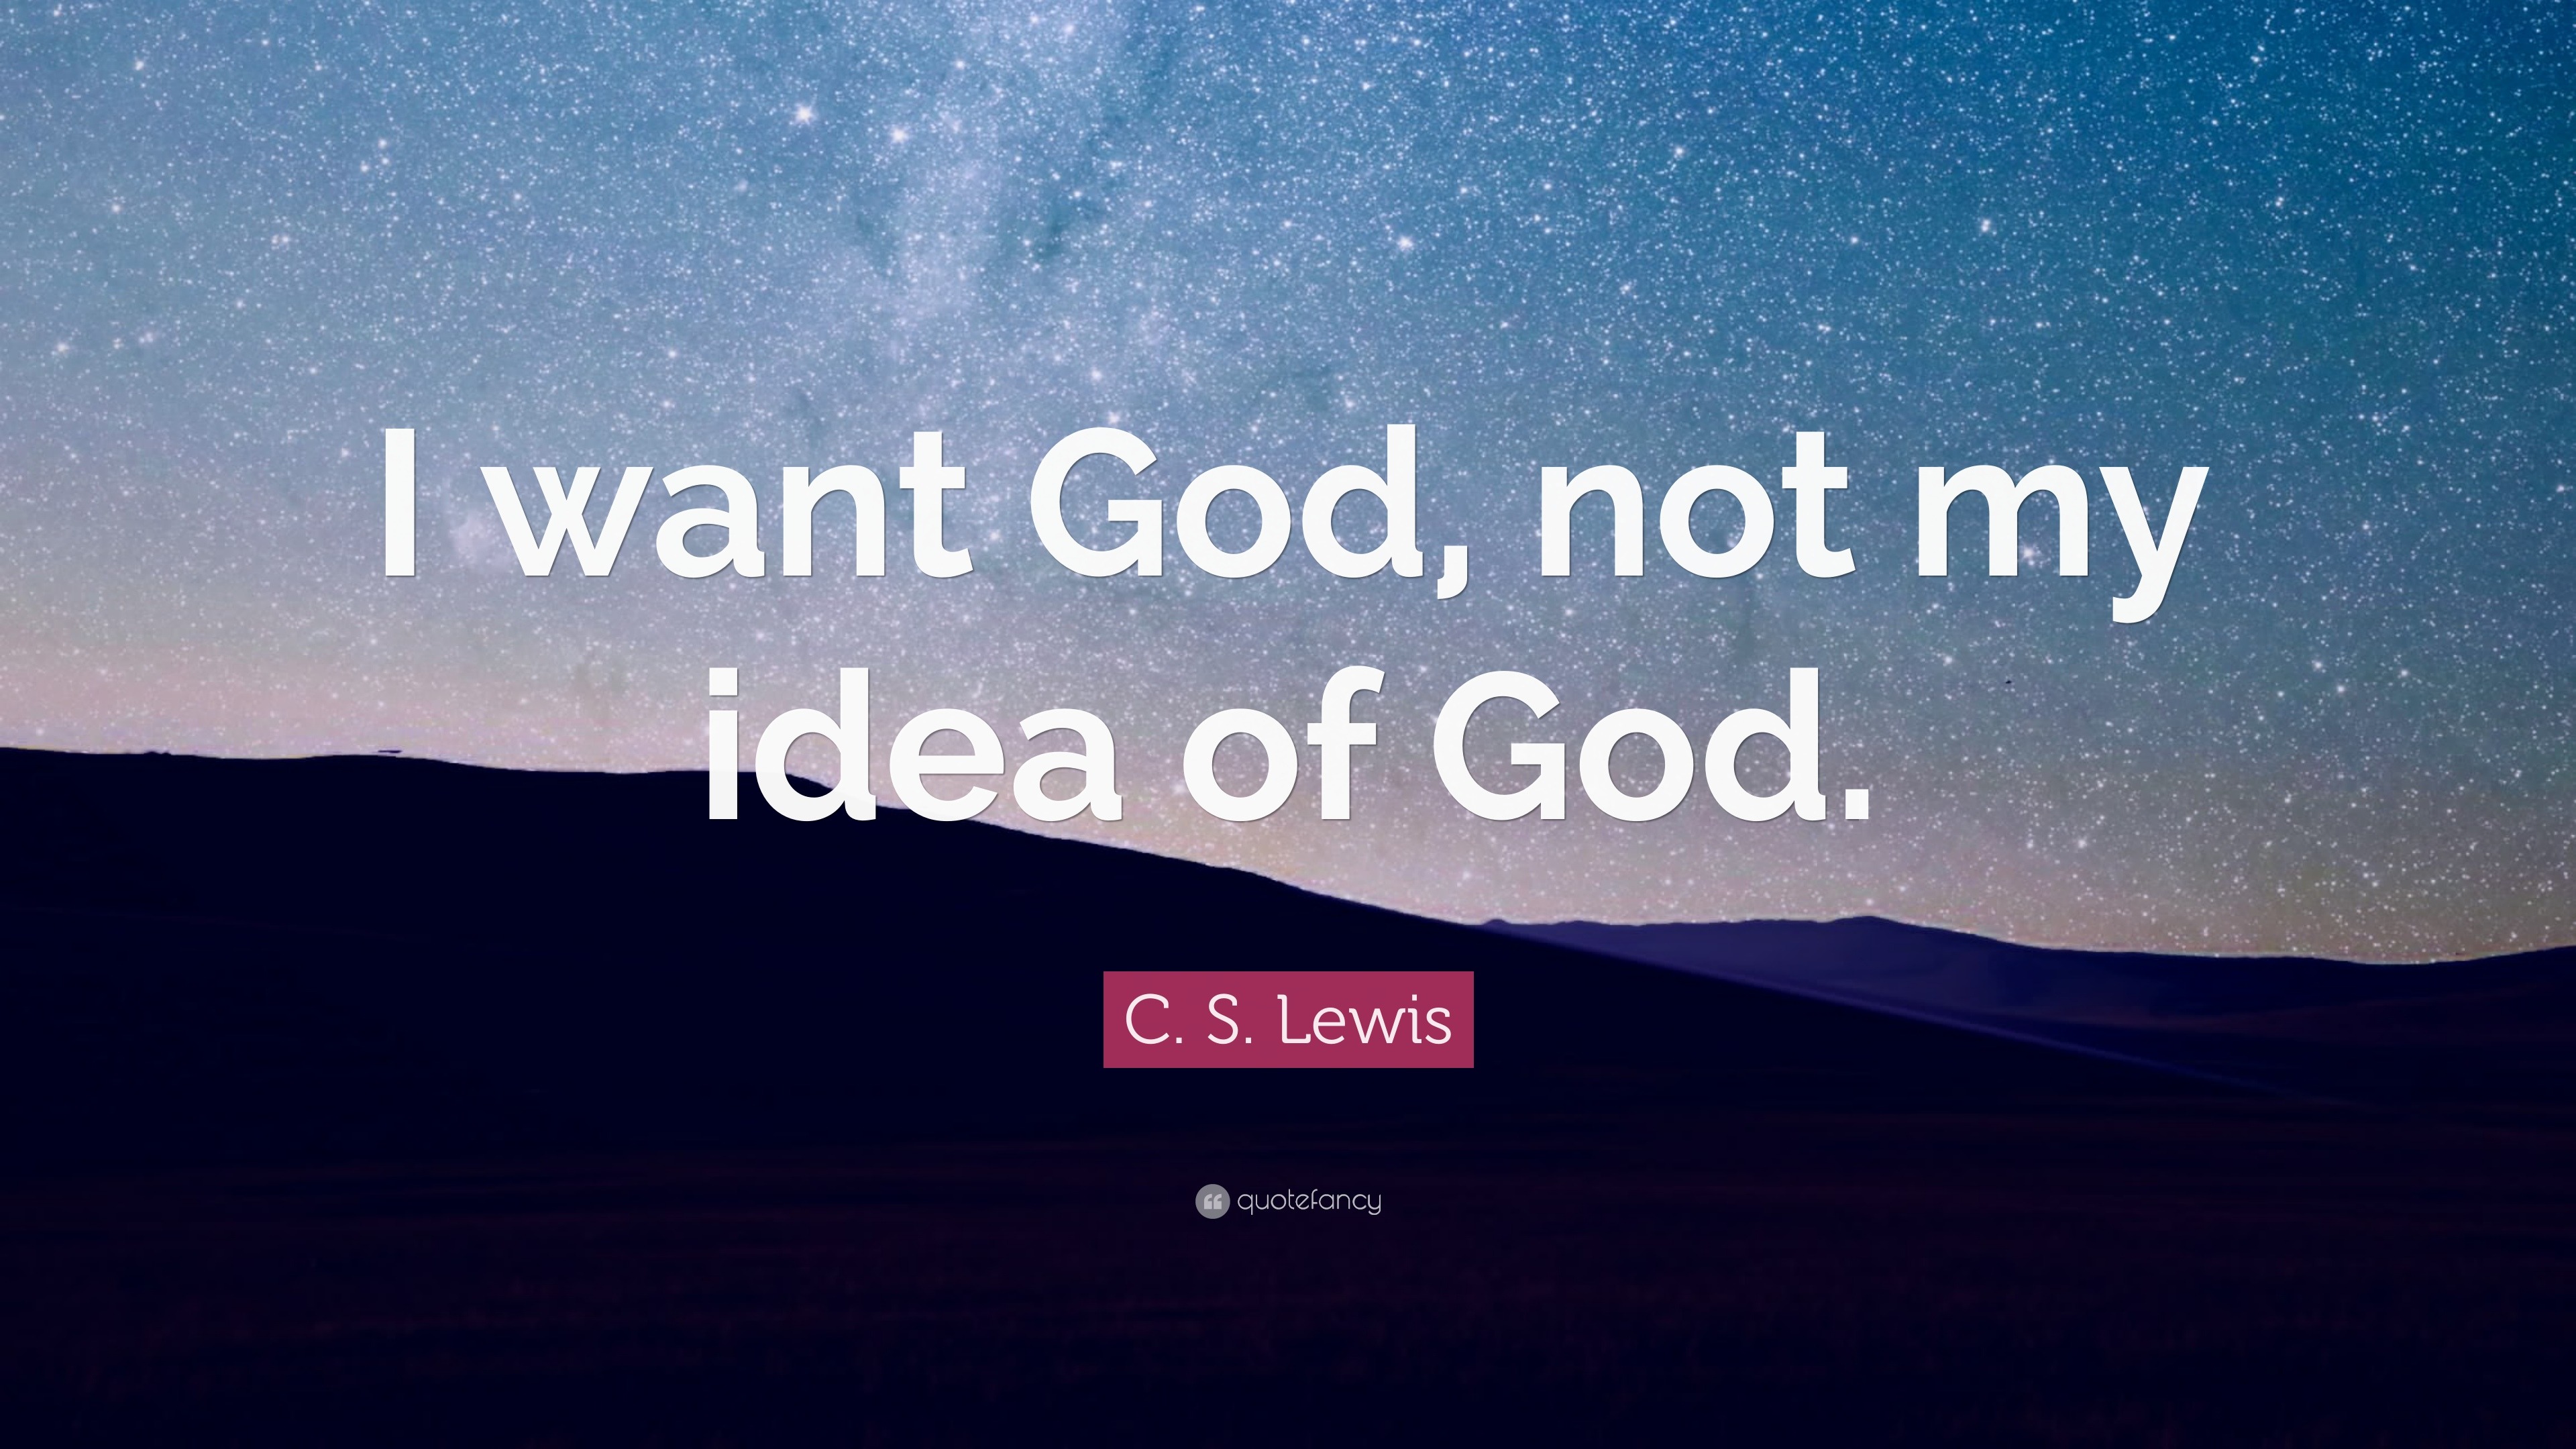 C. S. Lewis Quote “I want God, not my idea of God.”